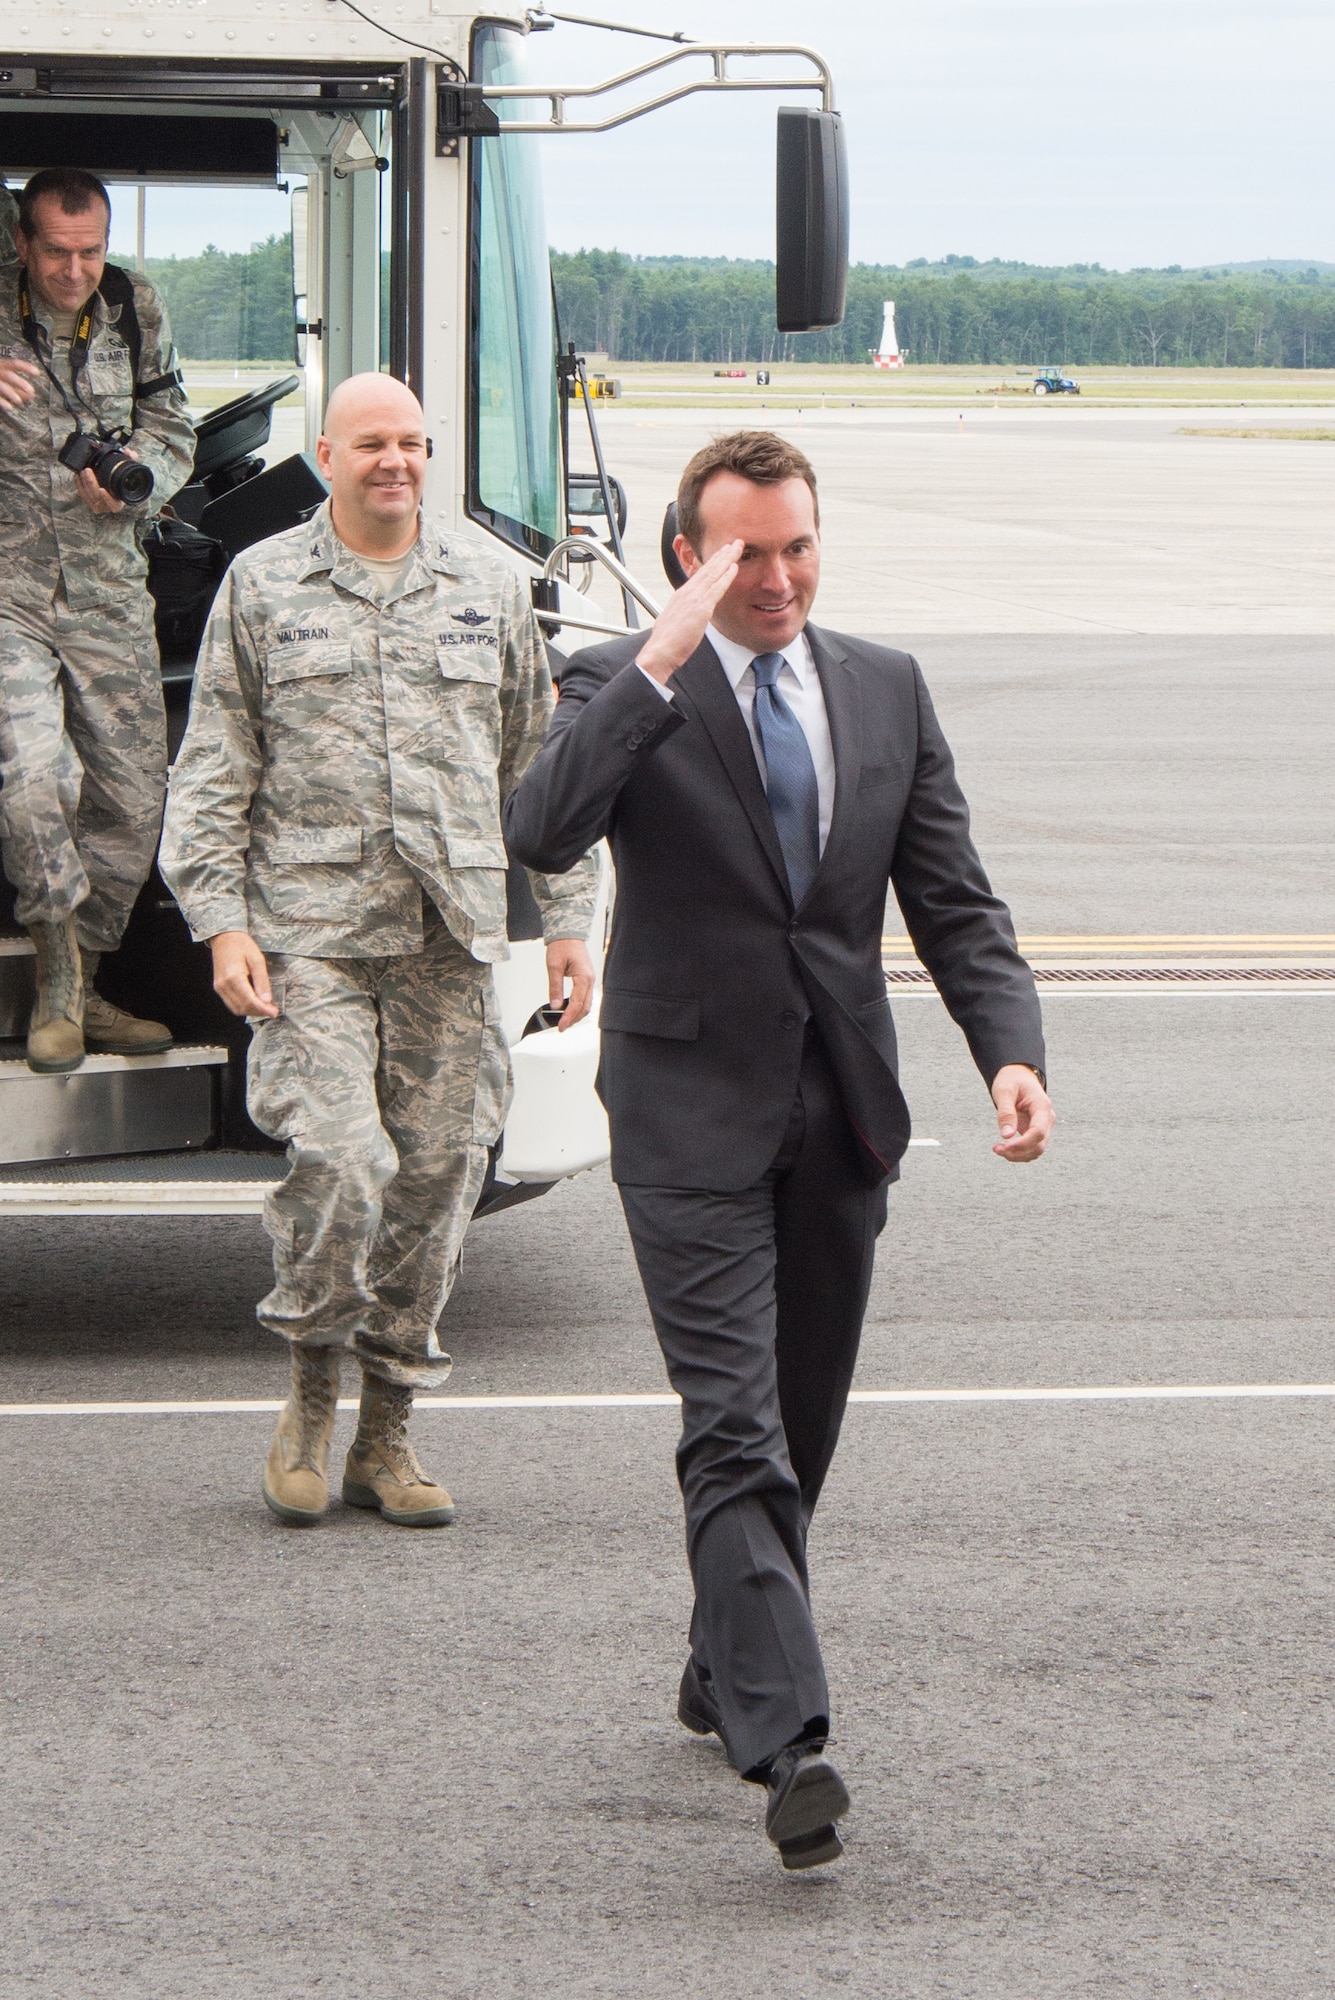 Acting Secretary of the Air Force, Eric Fanning, visits Westover Air Reserve Base, Mass., July 25. During his tour of the nation's largest Air Force Reserve base, Fanning saw its joint-service mission, "flew" a C-5 simulator, toured the base's control tower, and spoke to more than 450 troops about Air Force issues. (U.S. Air Force photo/MSgt. Todd Panico)